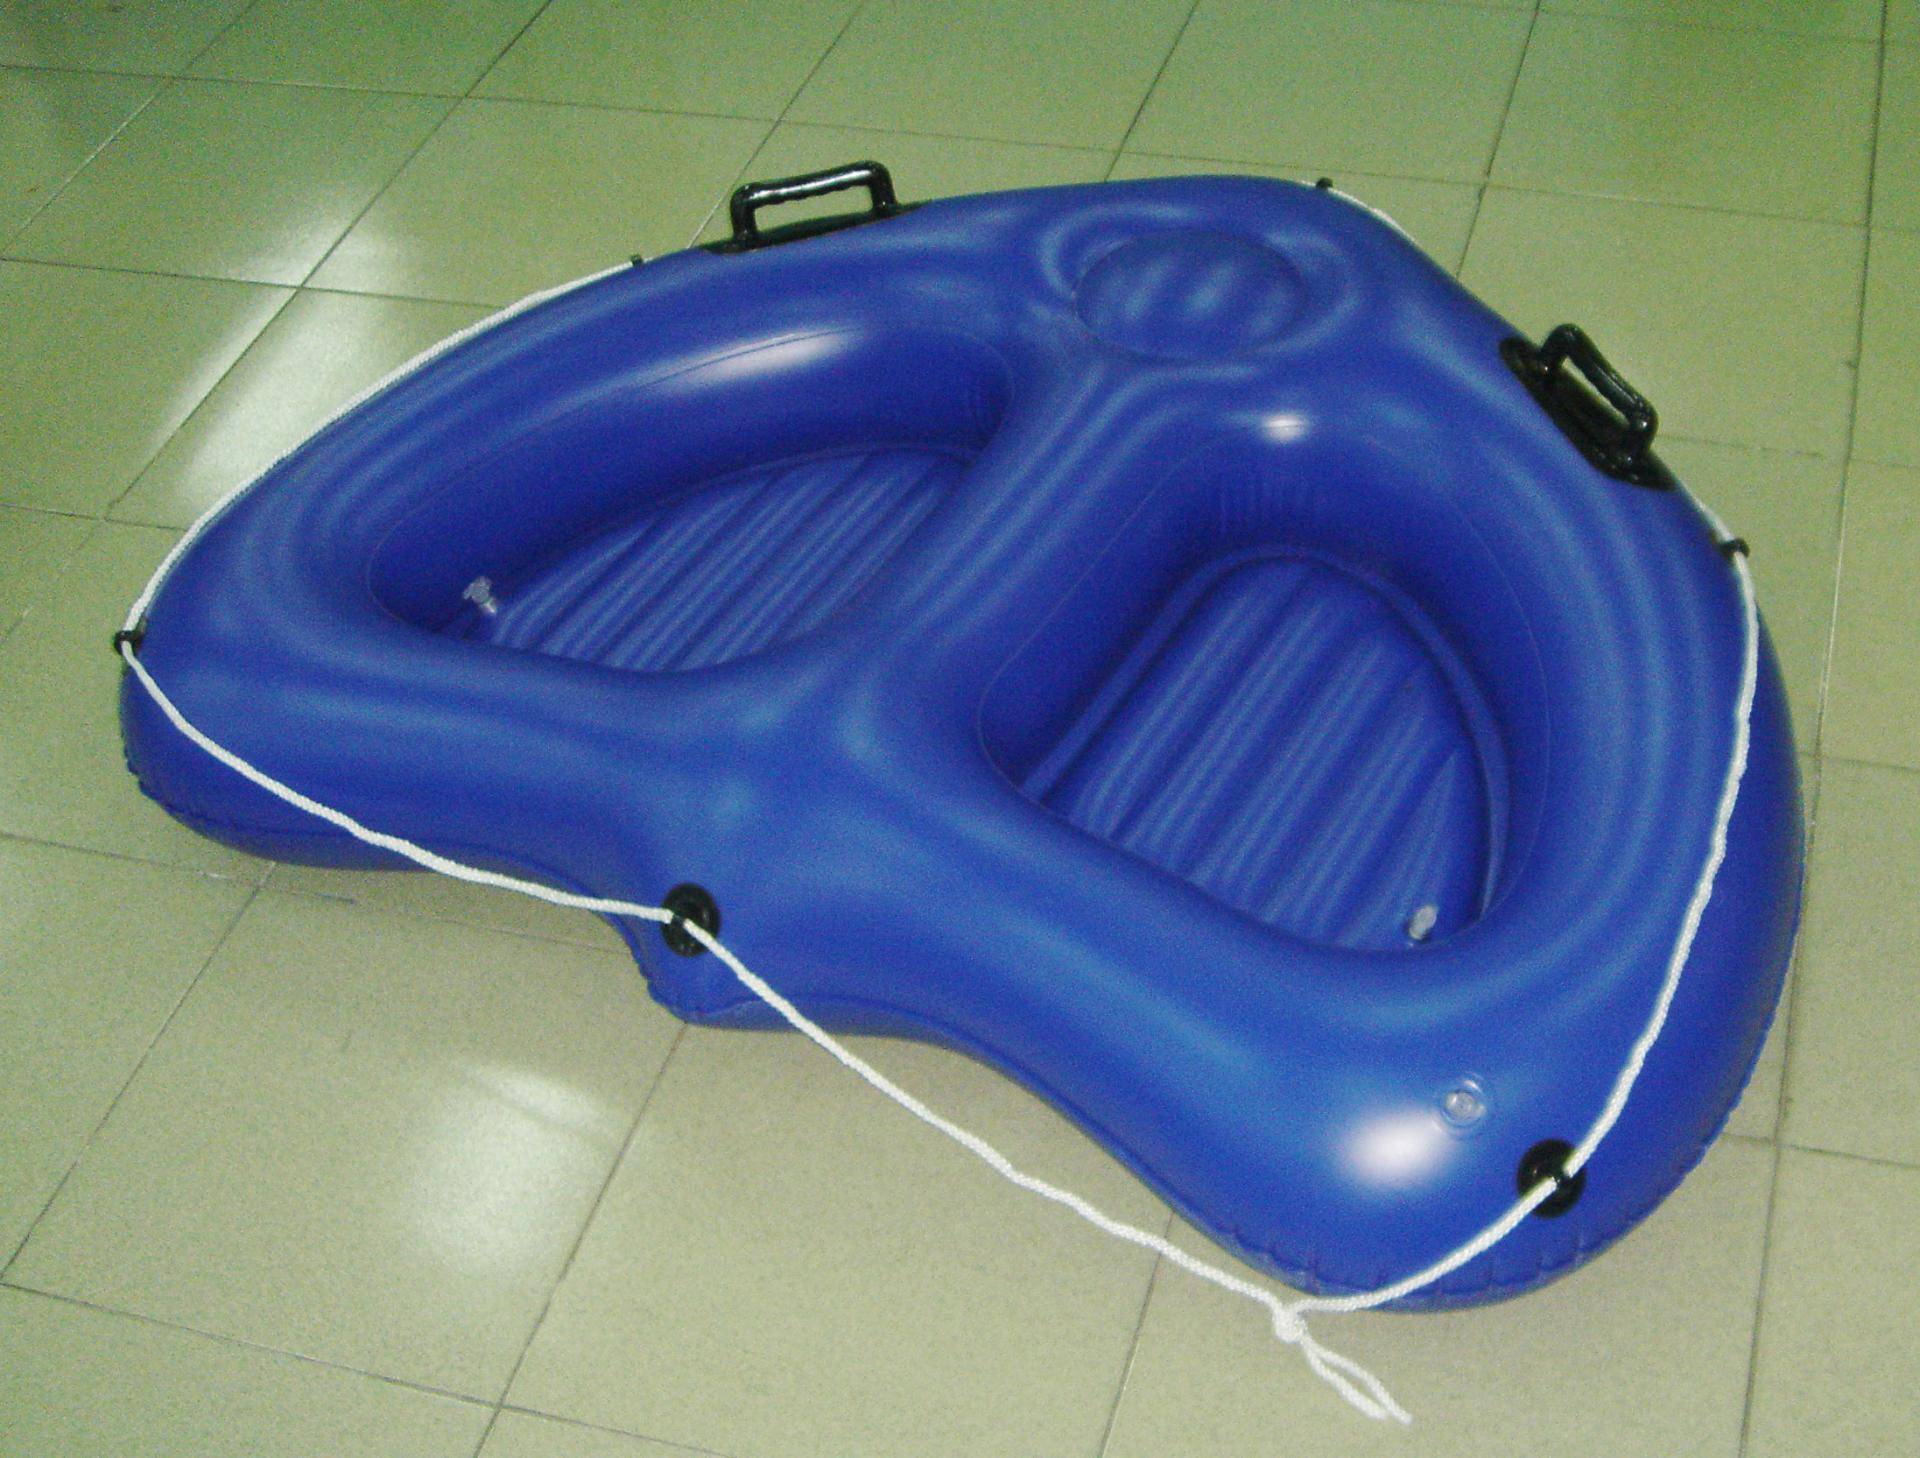 Customised Inflatable Snow Water Raft Sport Fun, Recreational Use Adult Beach With Two Handles